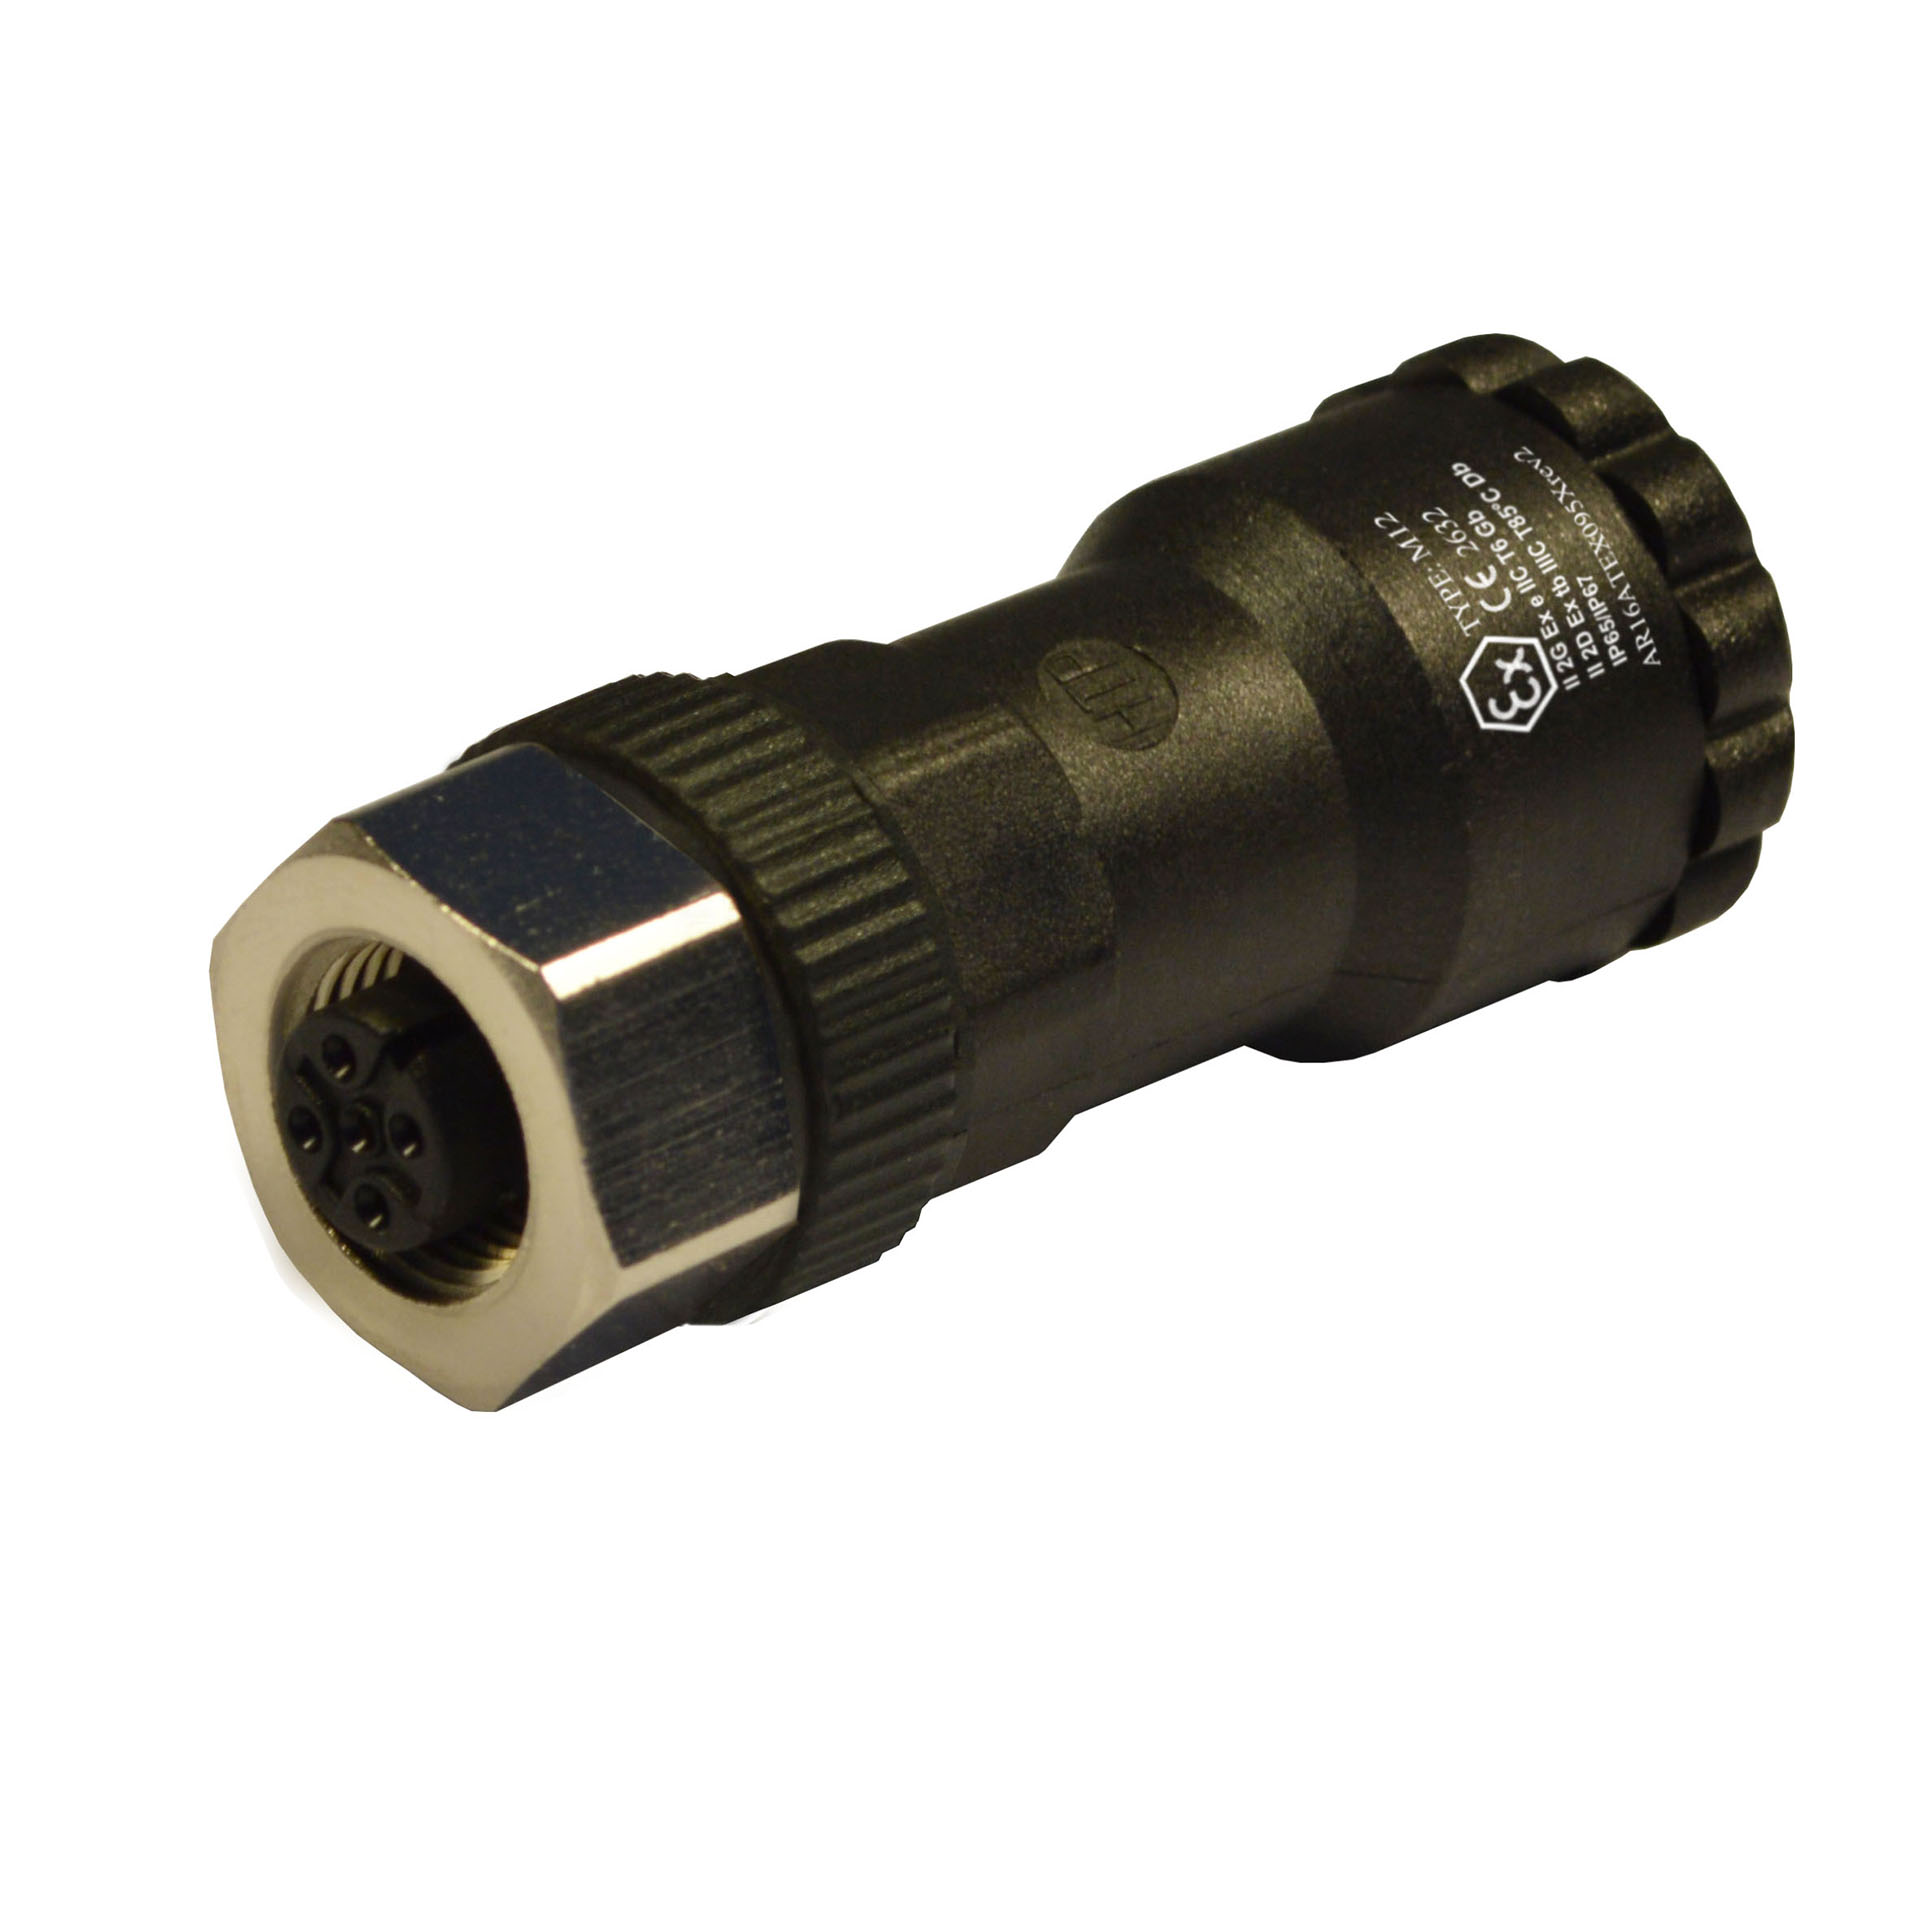 M12 field attachable,female,180°,5p.,PG9/11unif.or double exit cable,ATEX conform